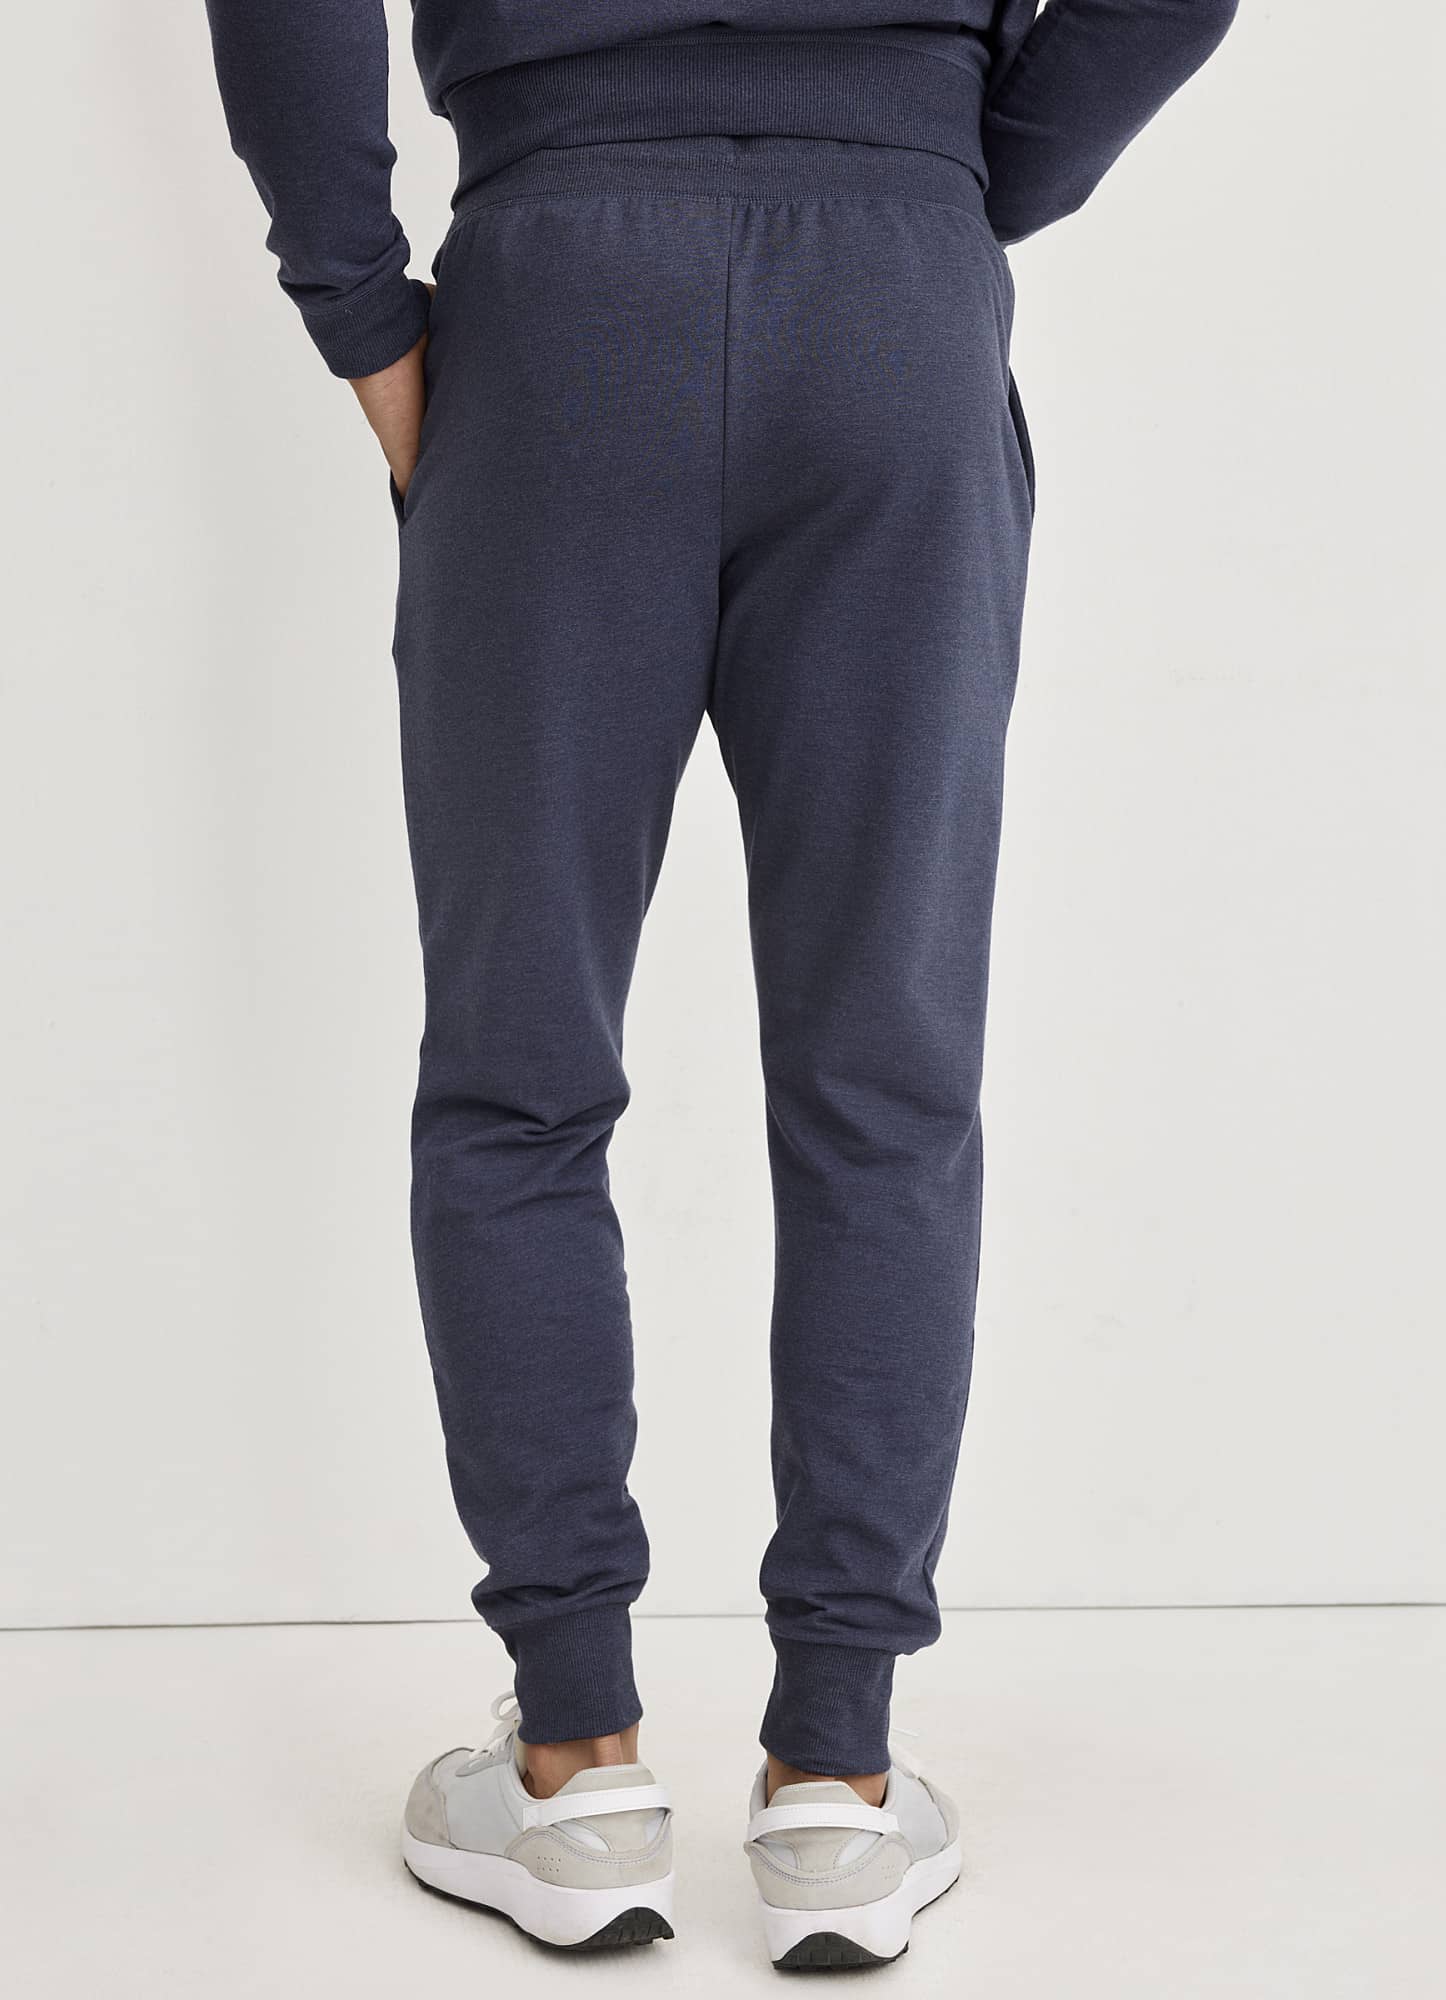 Real Essentials 3 Pack: Women's Ultra-Soft & Warm Fleece Joggers (Available  in Plus Size)